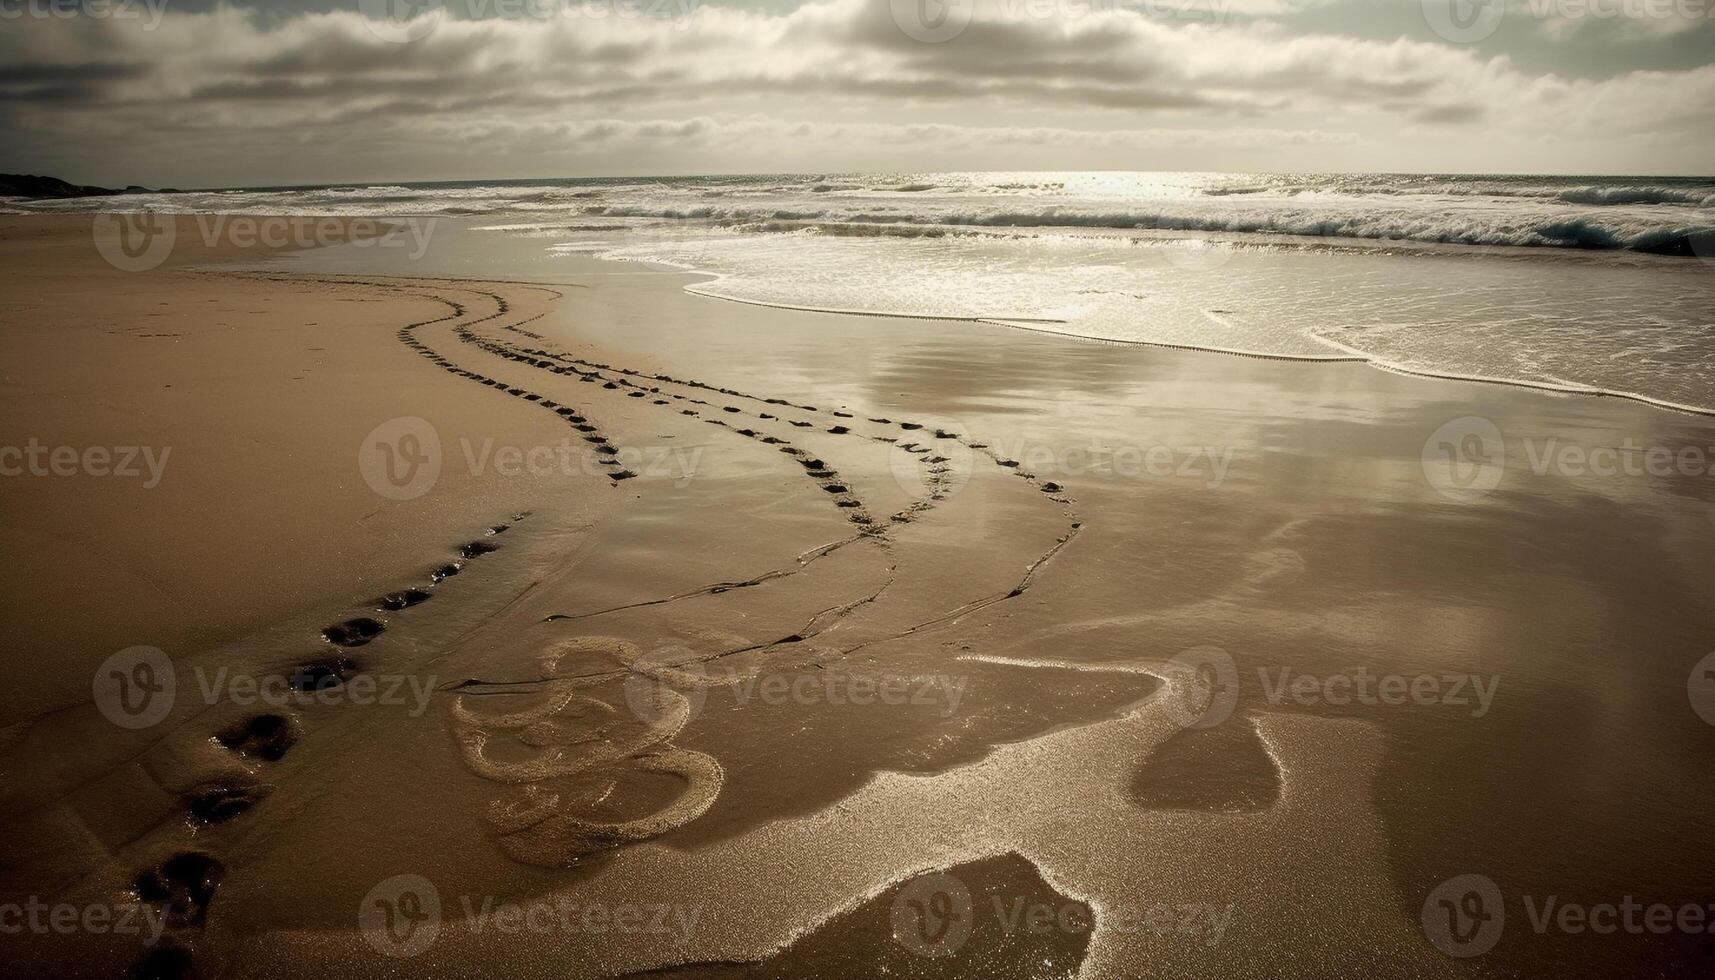 Wet footprint on tranquil coastline at dusk generated by AI photo